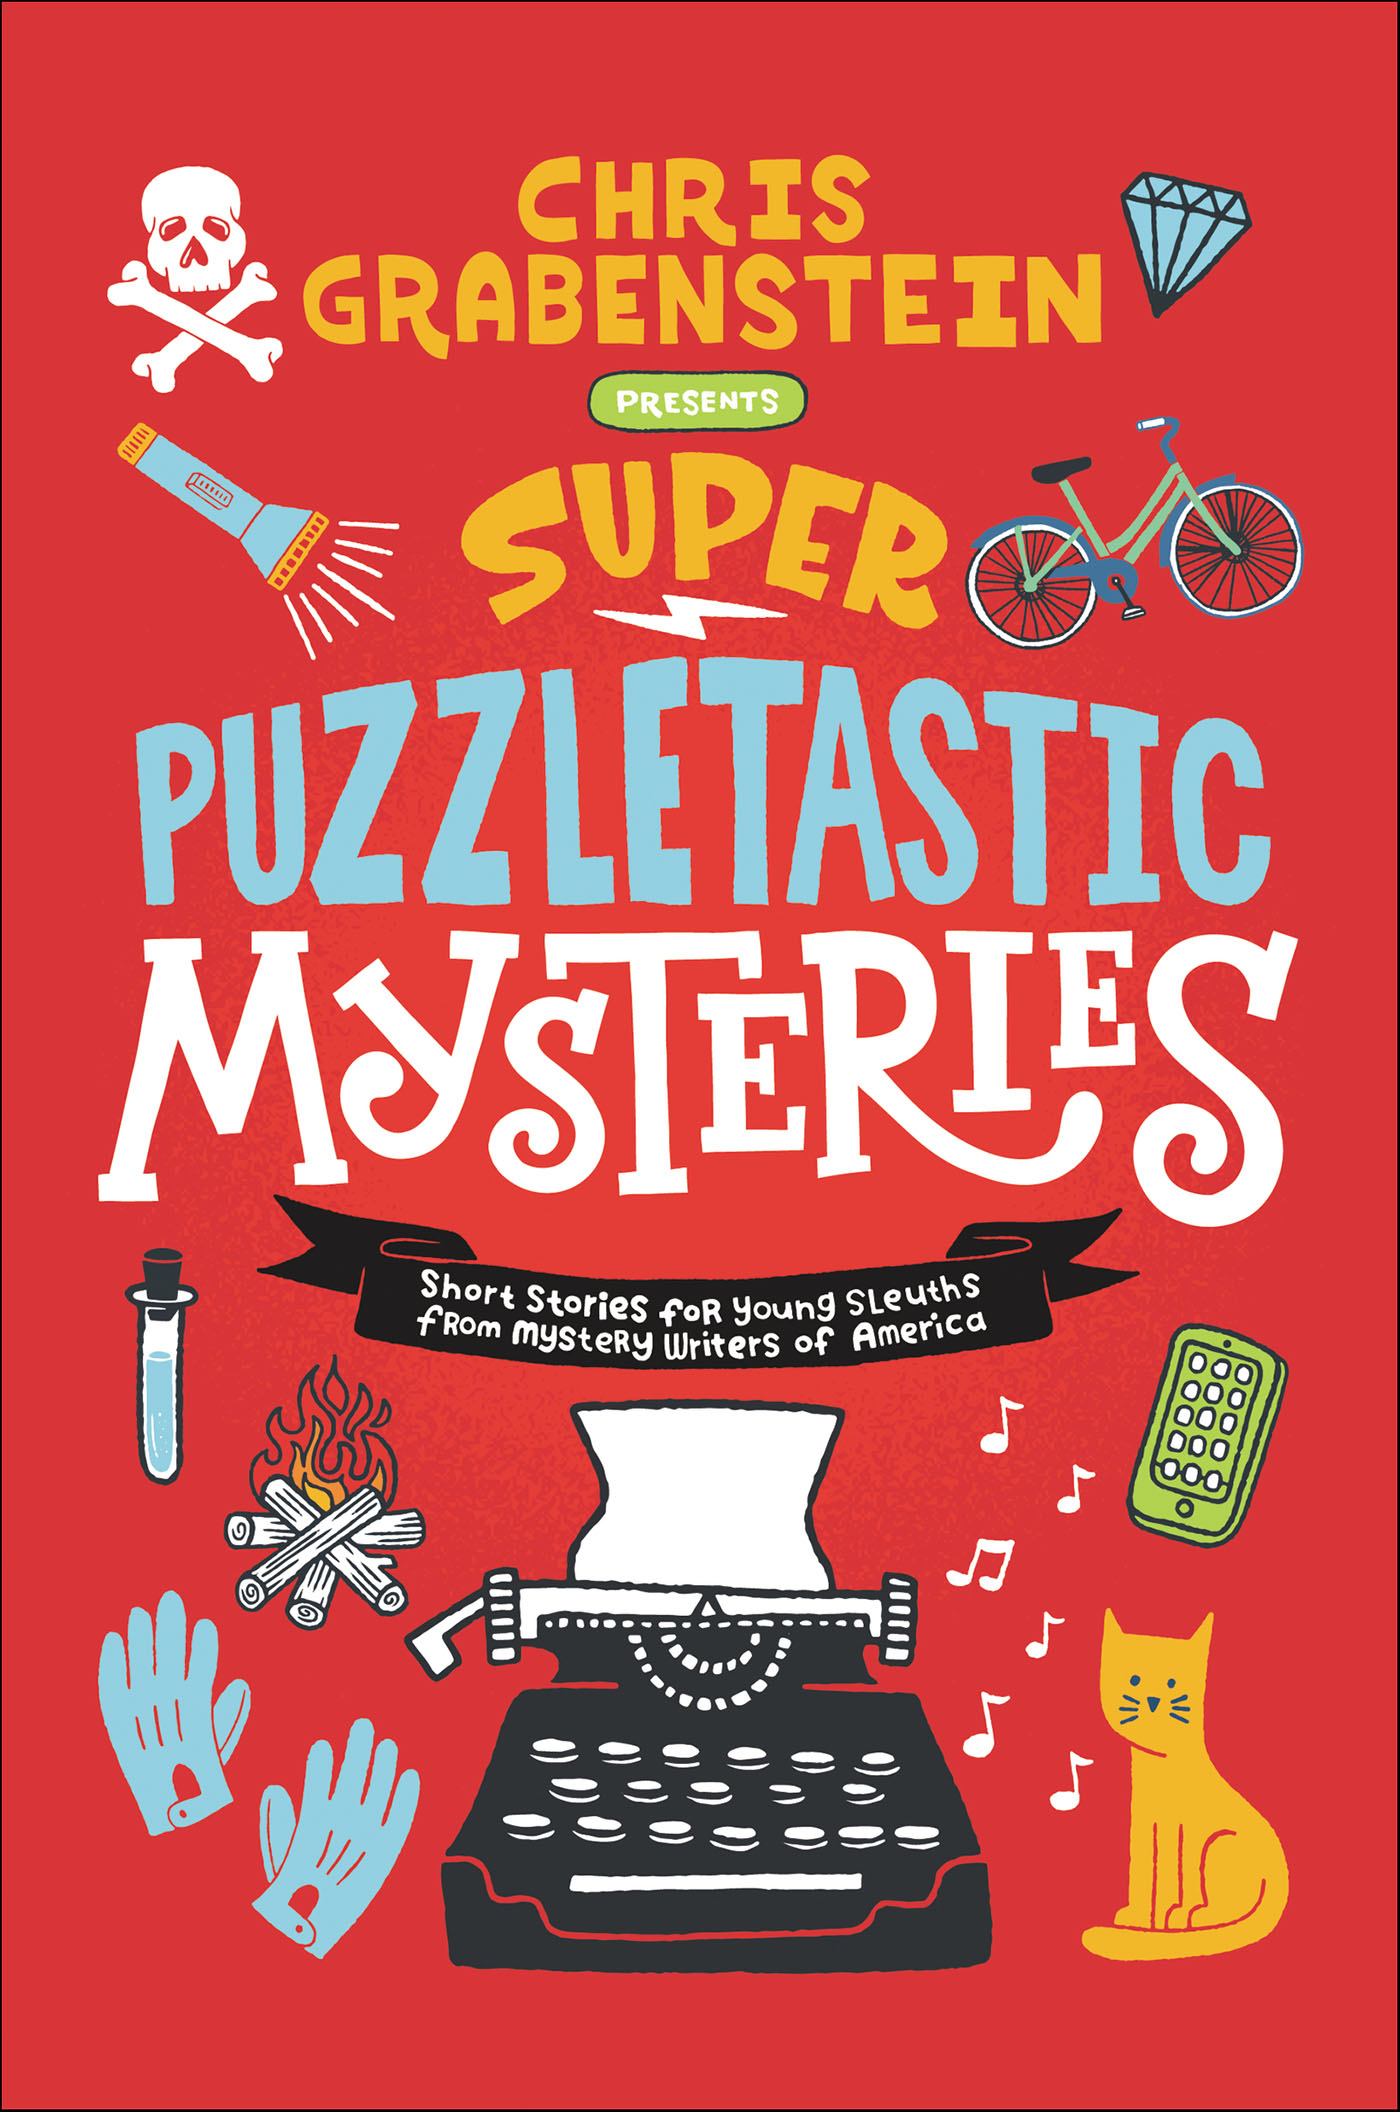 Super Puzzletastic Mysteries Short Stories for Young Sleuths from Mystery Writers of America cover image